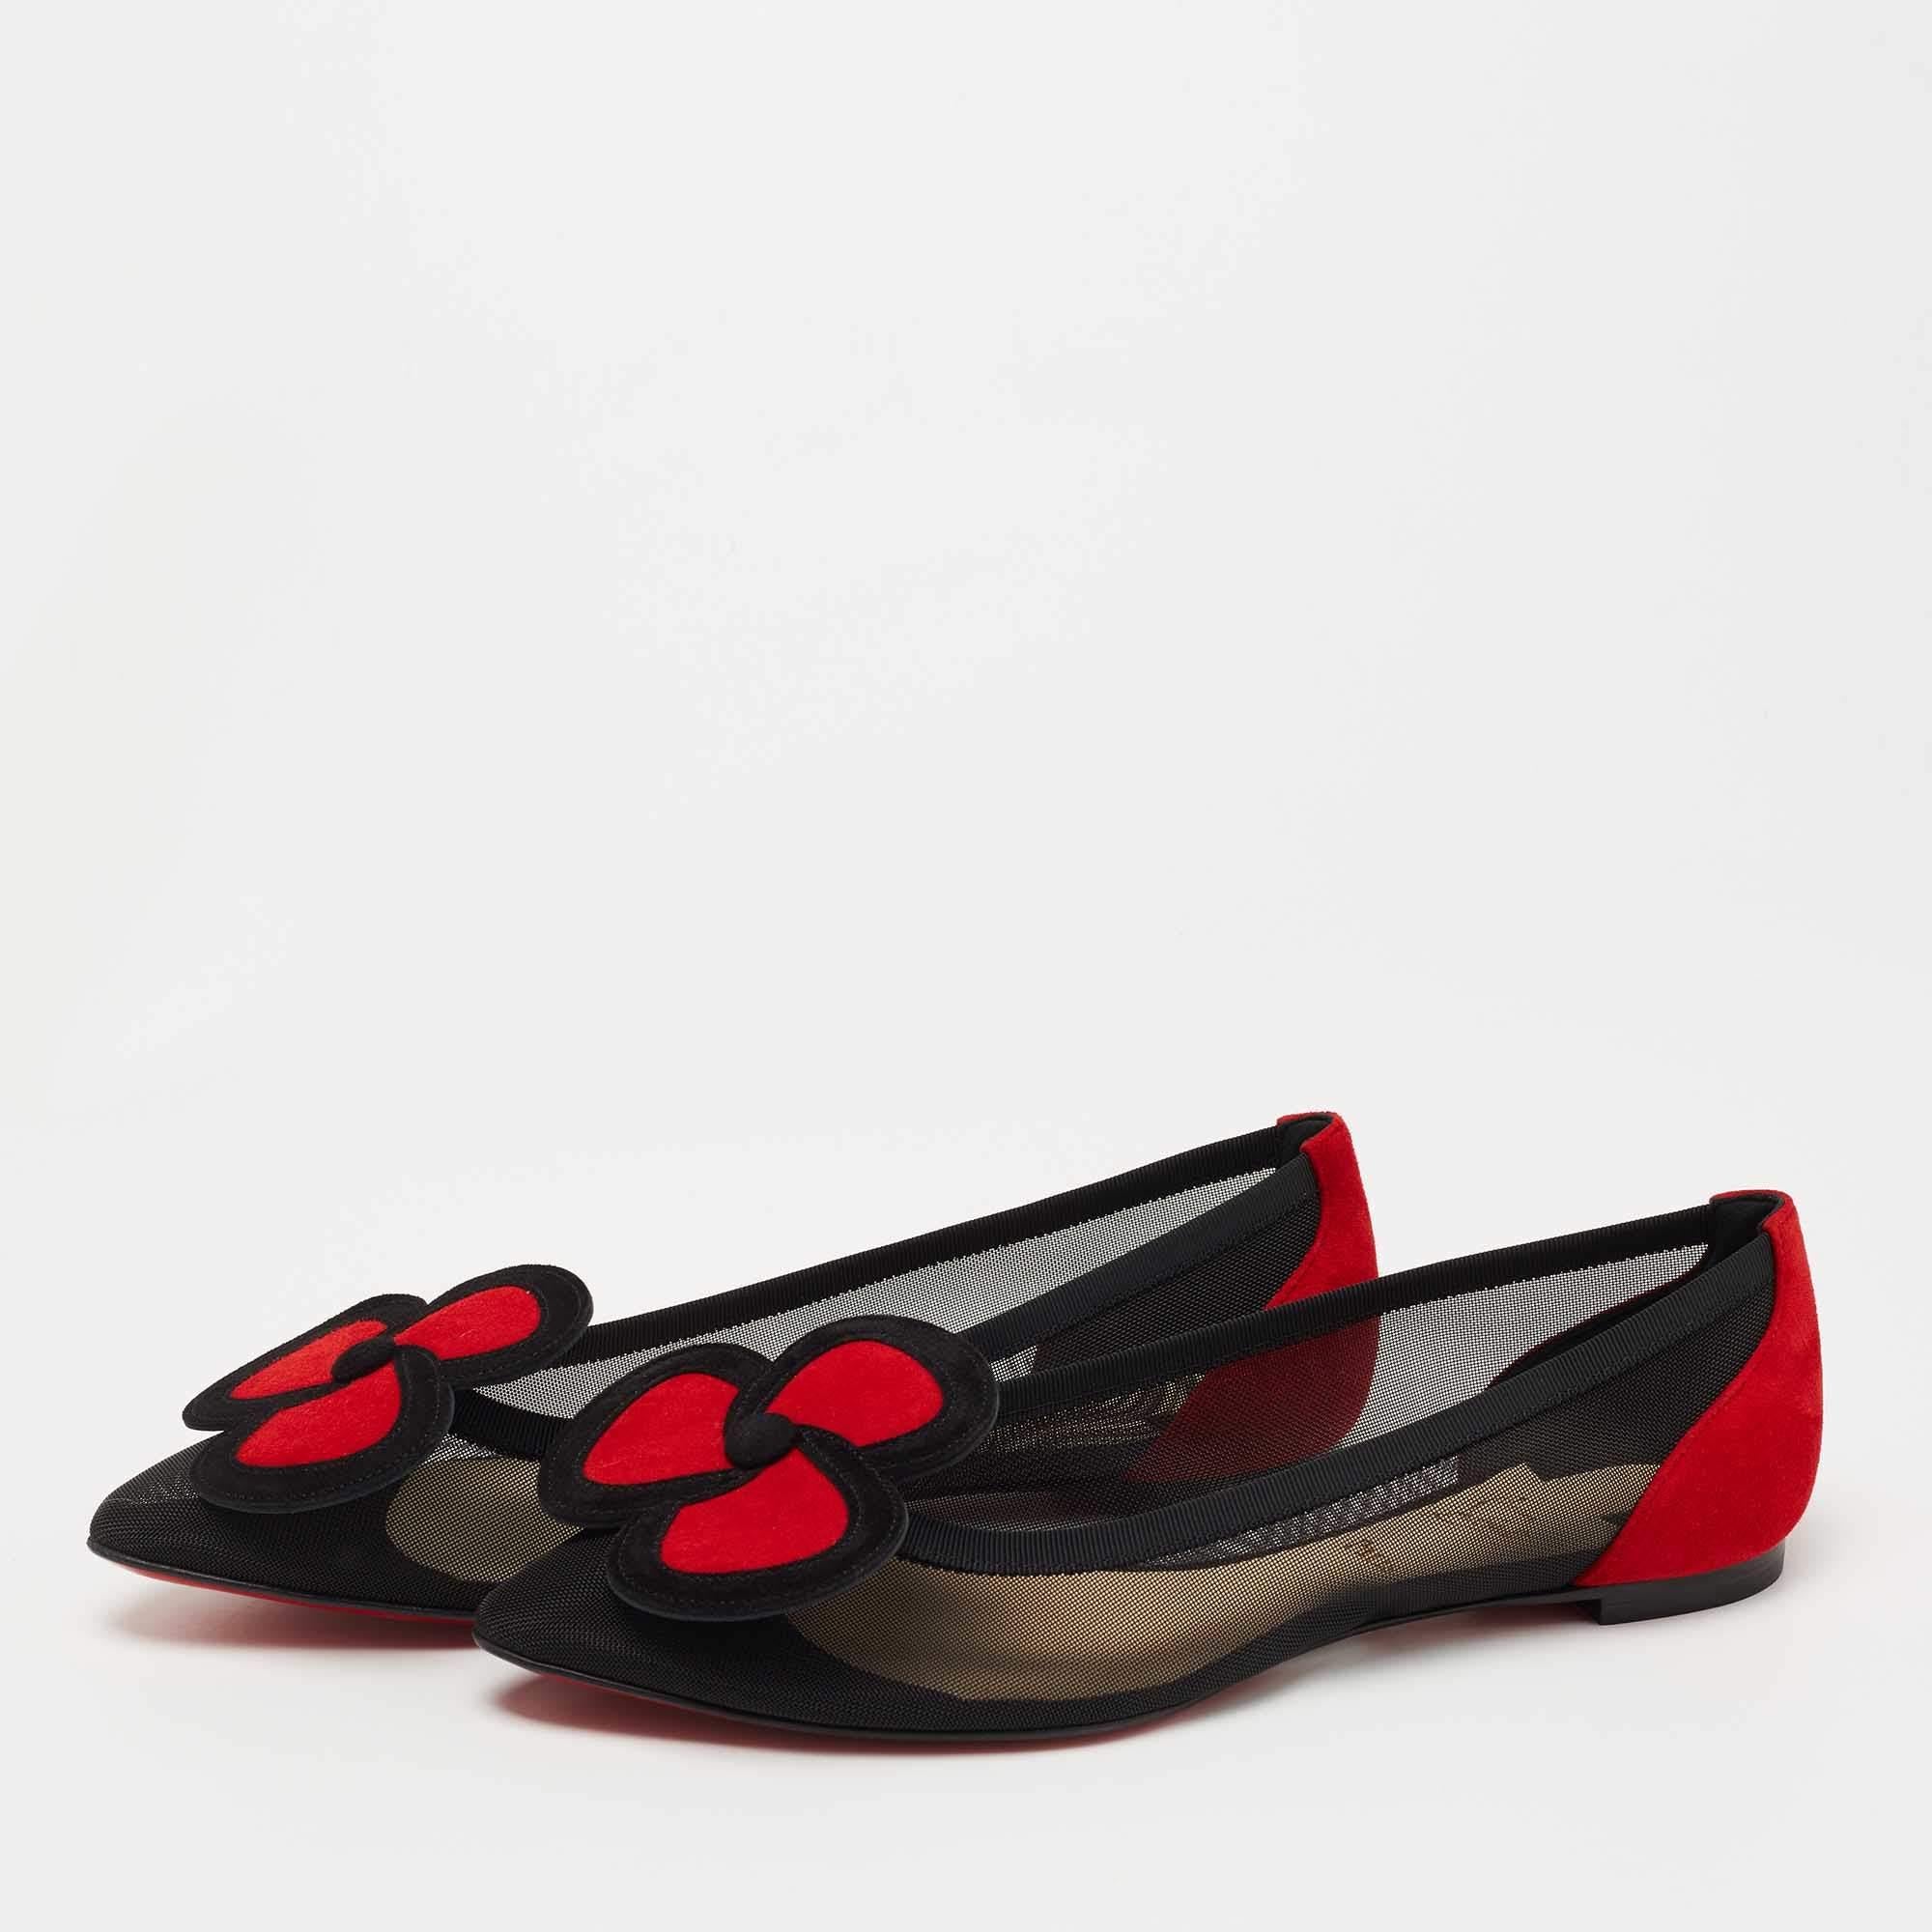 Women's Christian Louboutin Black/Red Suede and Mesh Pansy Ballet Flats Size 38